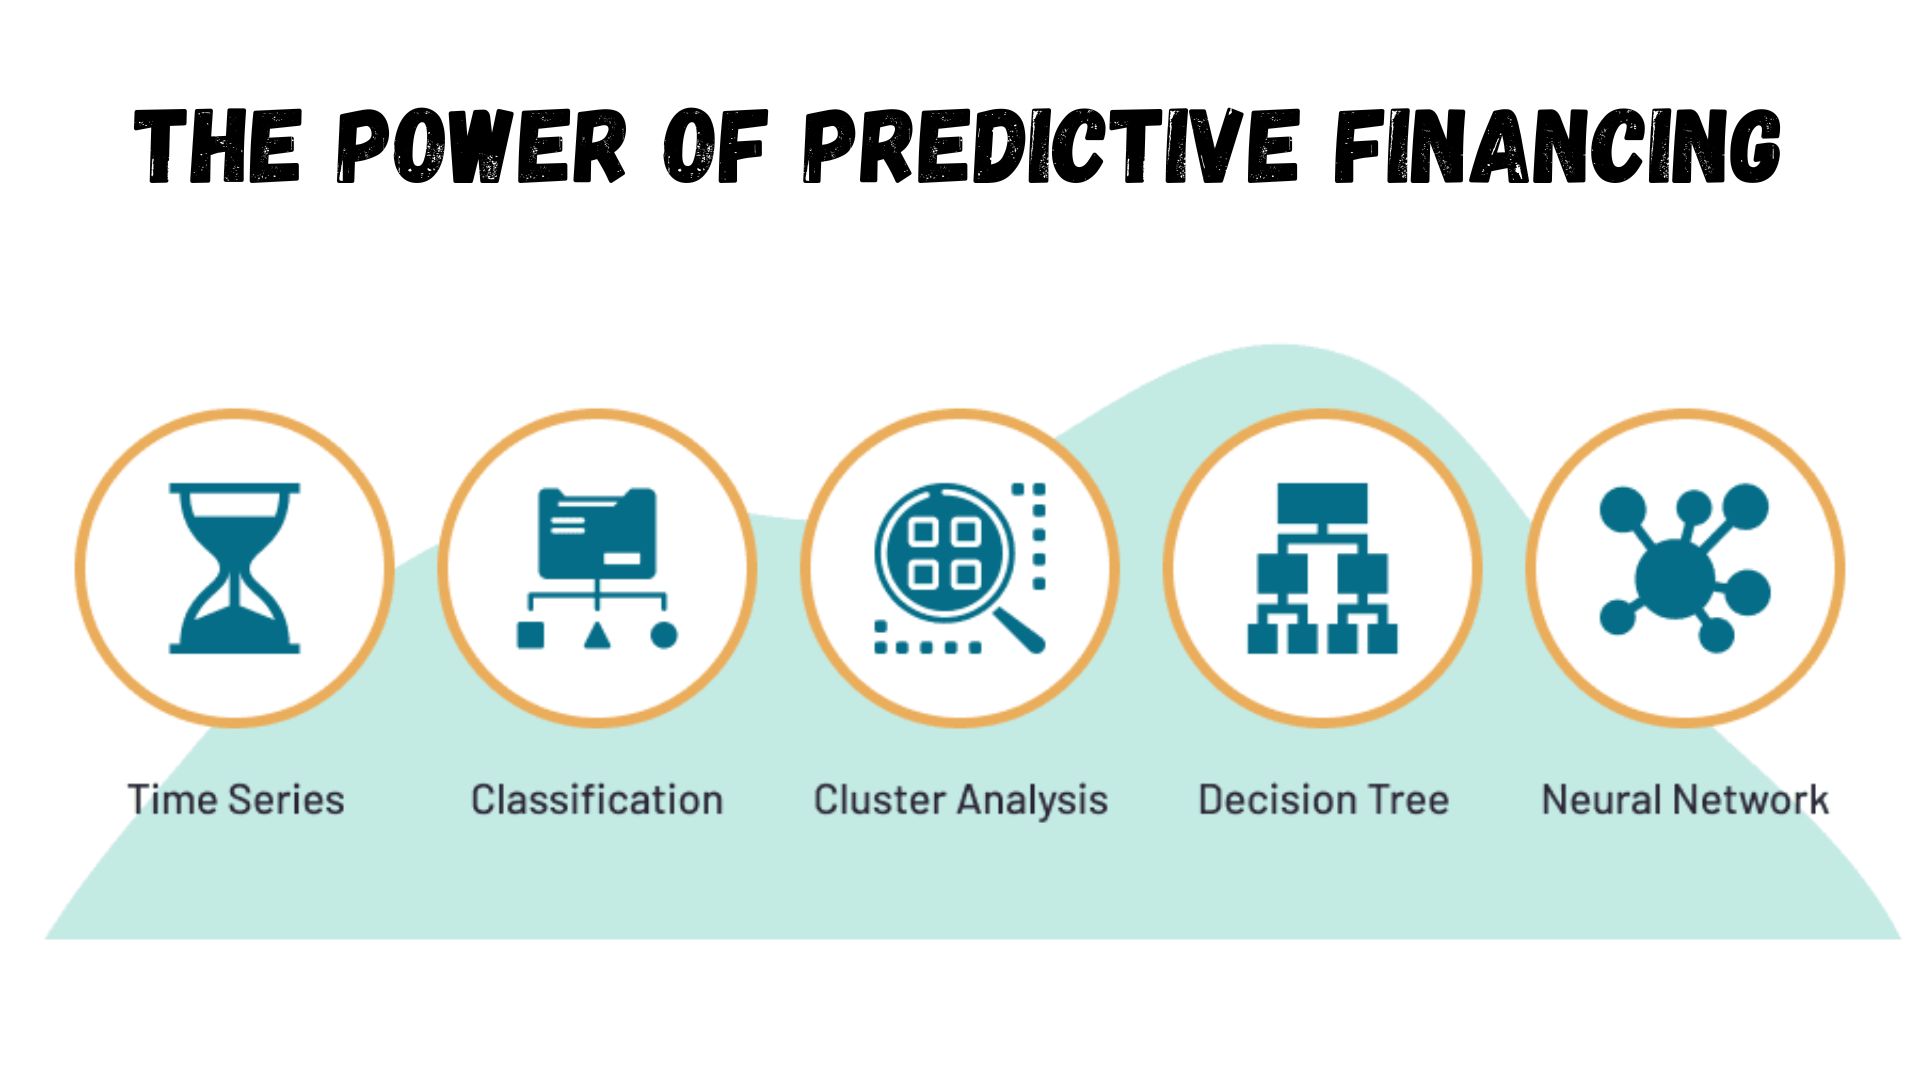 The Power of Predictive Financing.